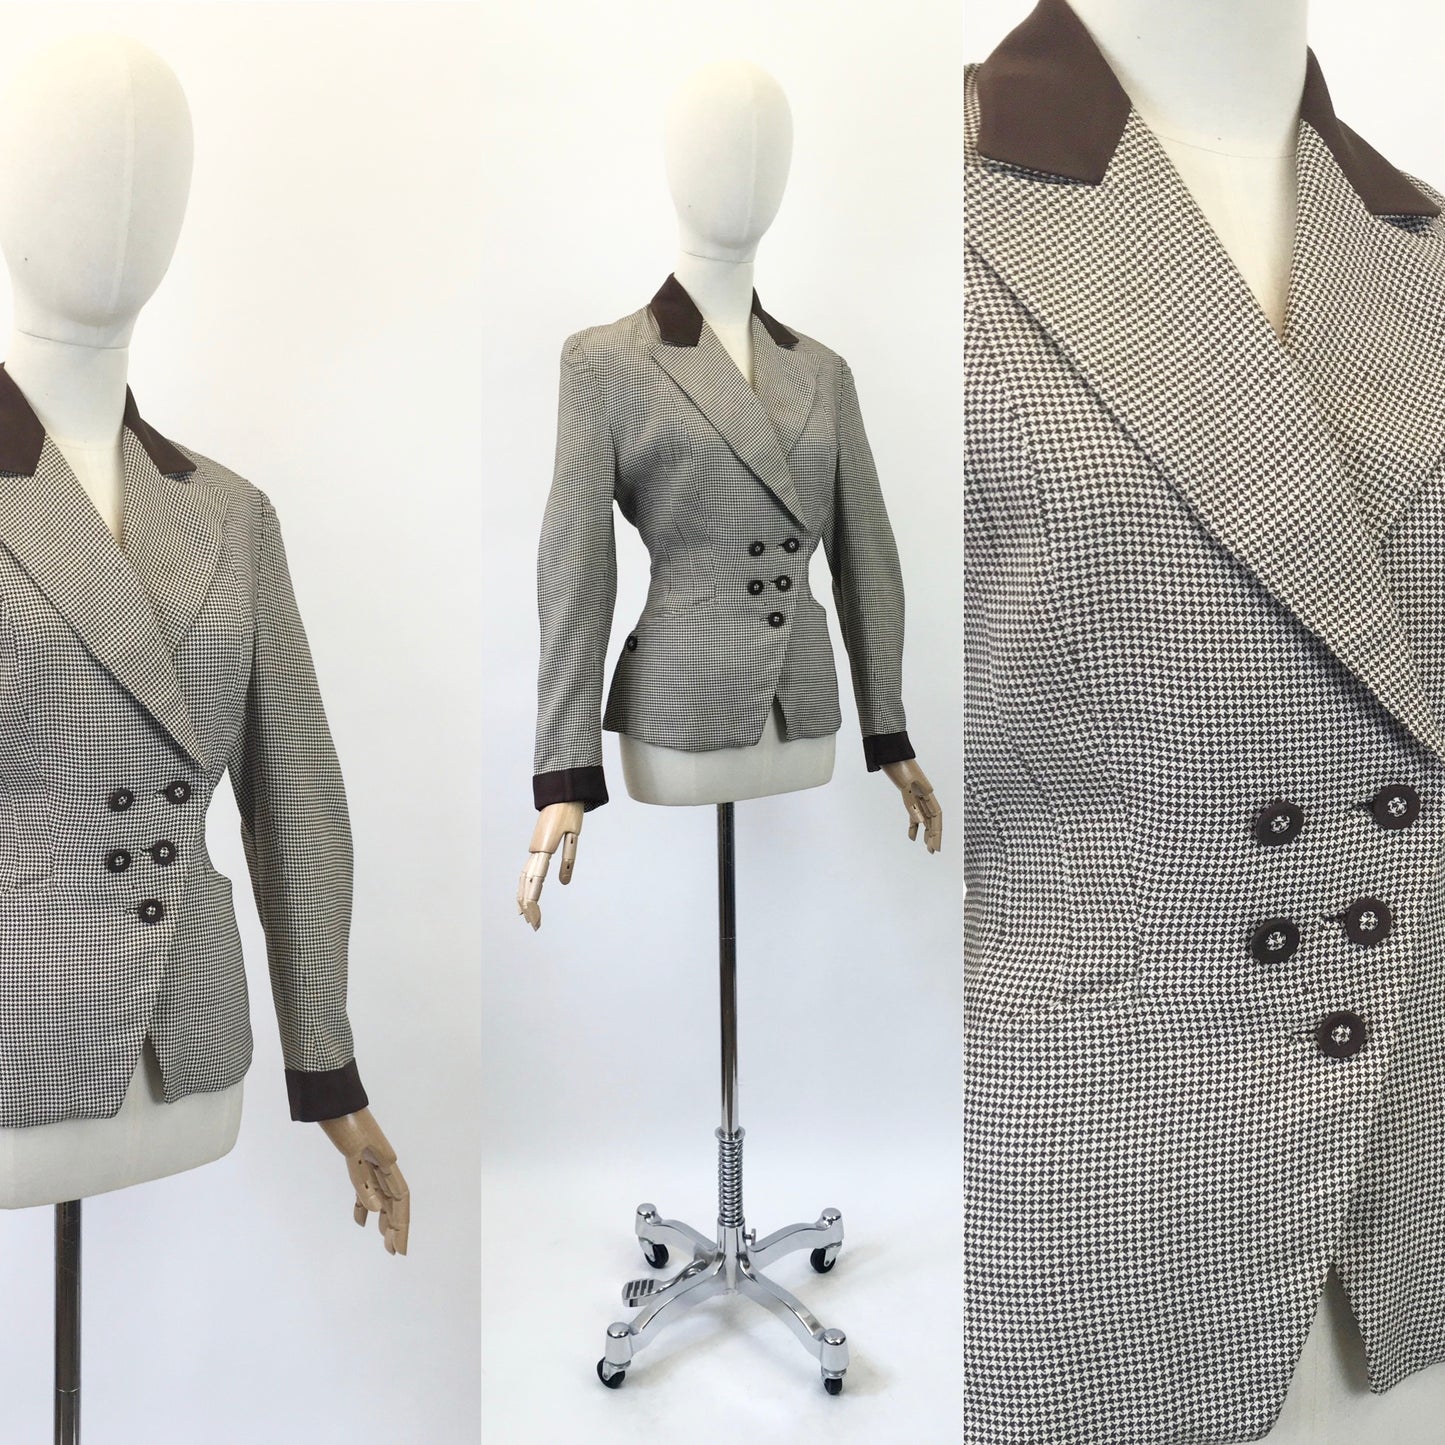 Original 1940's Stunning Asymmetric Jacket - In A Coffee And Cream Houndstooth